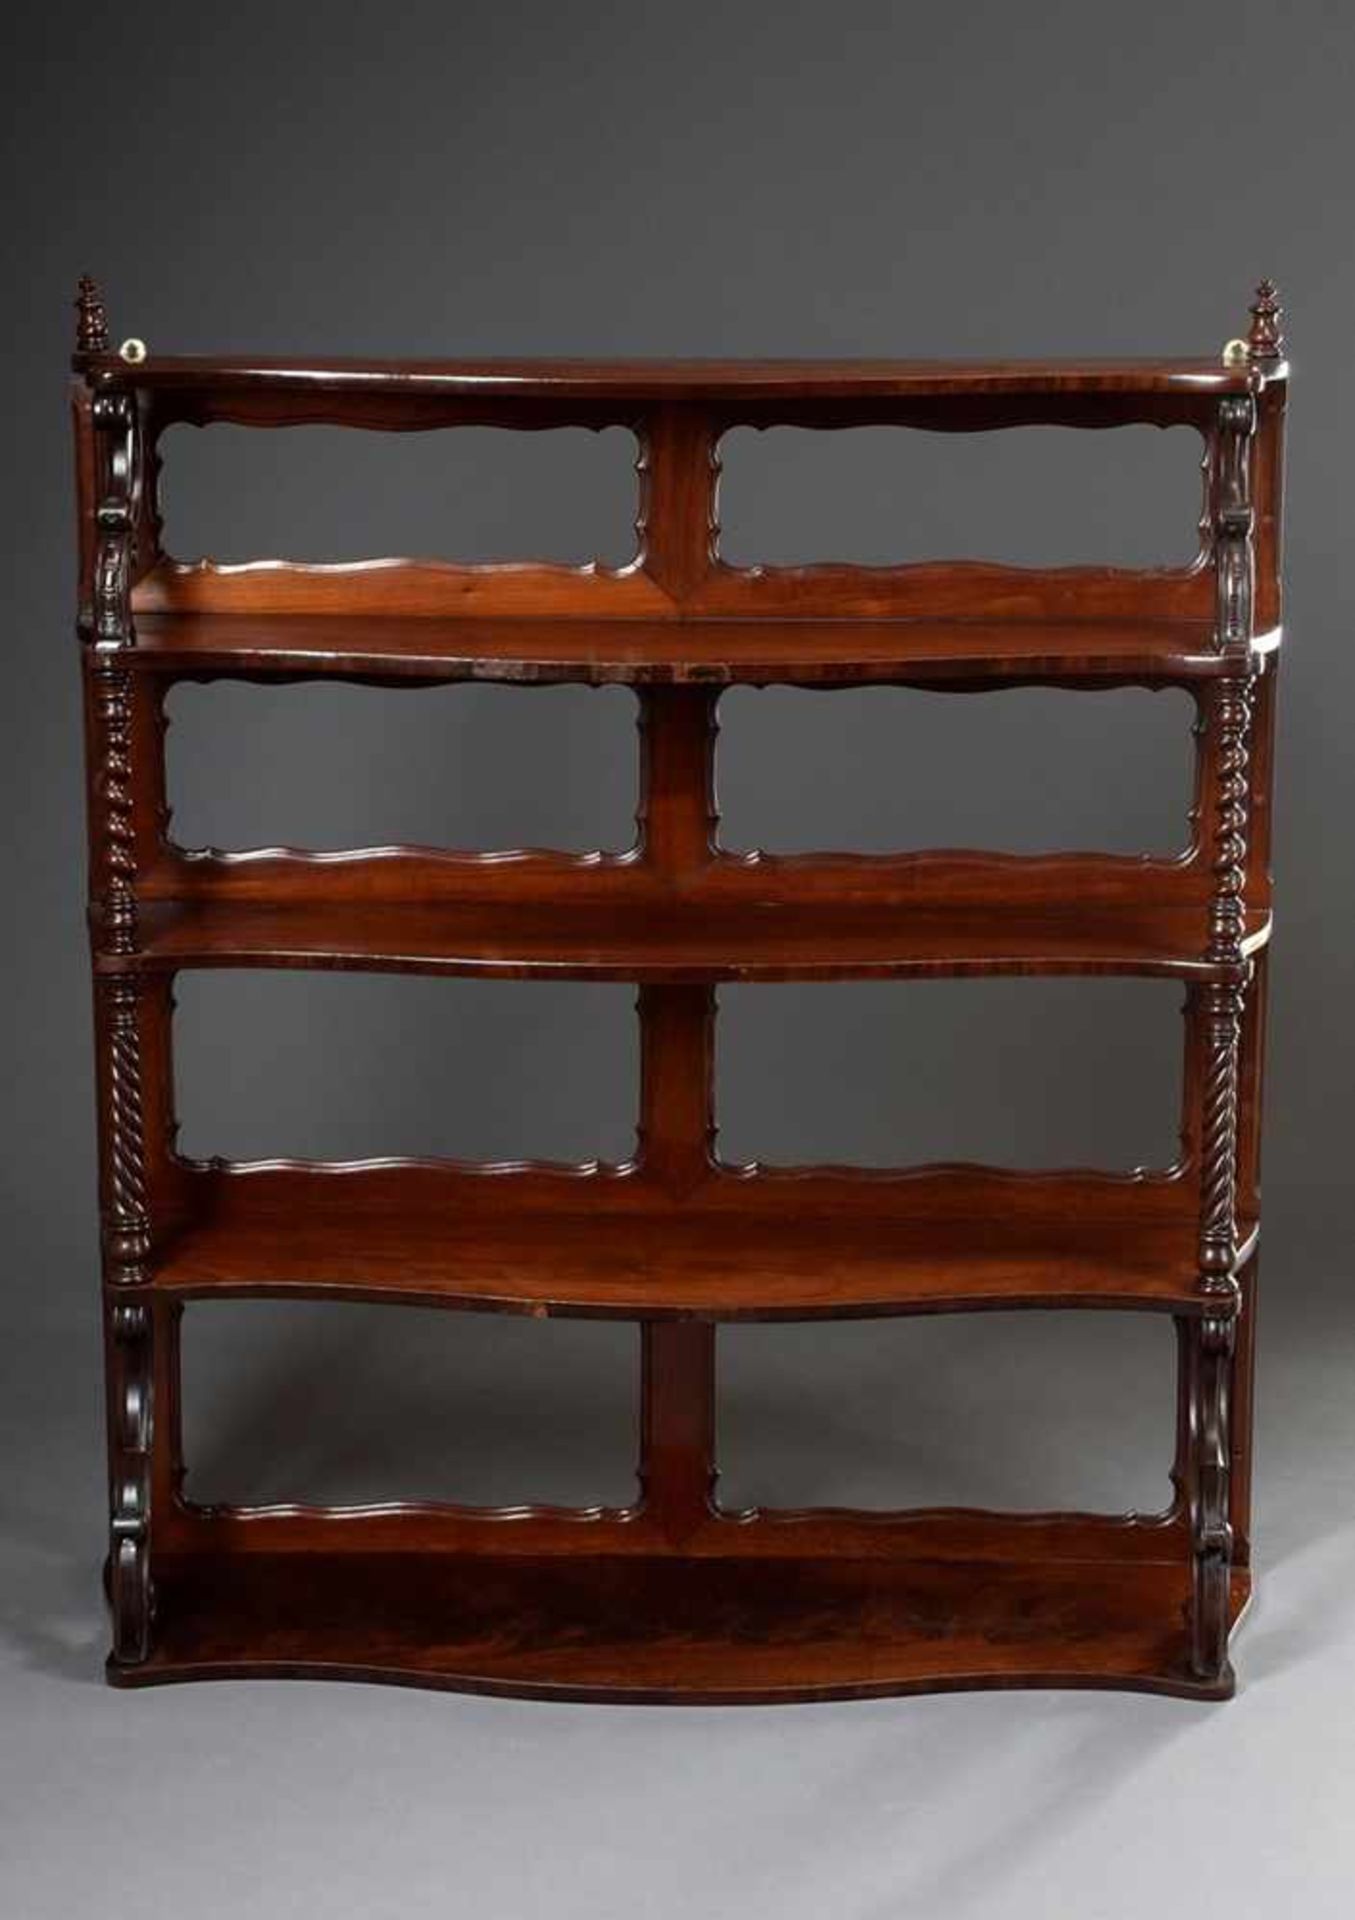 Late Biedermeier wall shelf with turned columns and 5 shelves, mahogany, end of 19th century, - Image 2 of 5